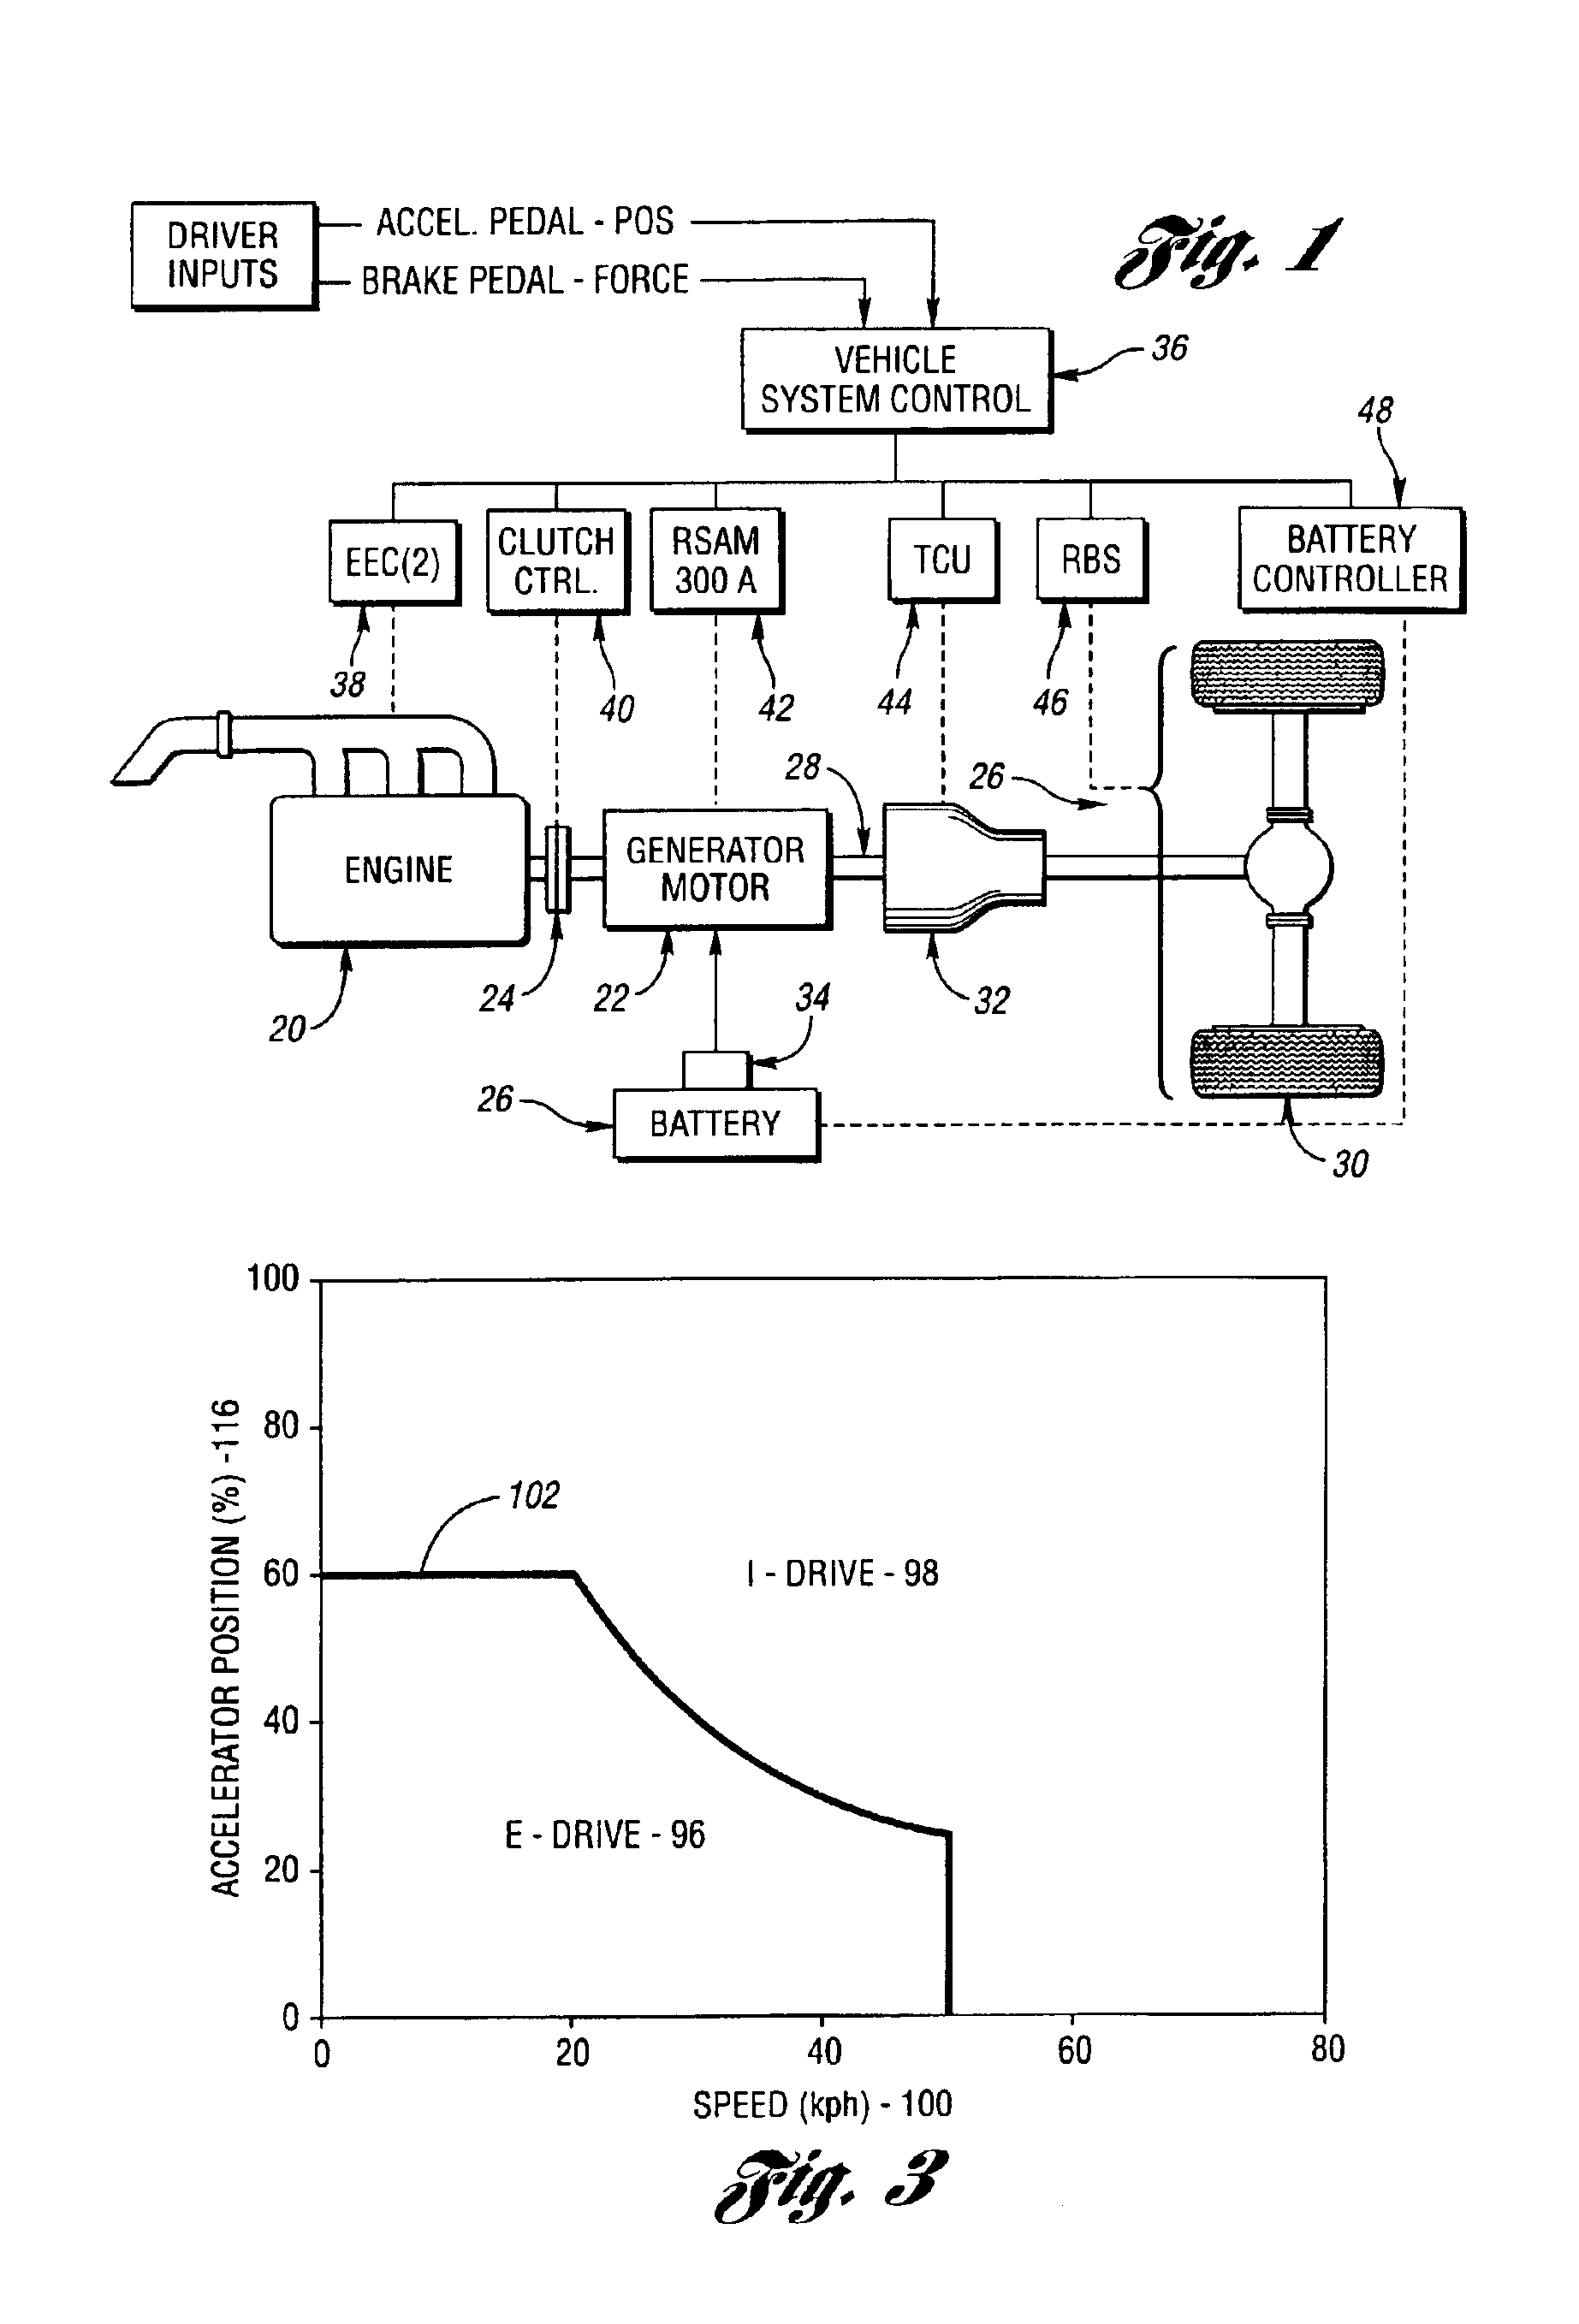 Control system for a hybrid electric vehicle to anticipate the need for a mode change